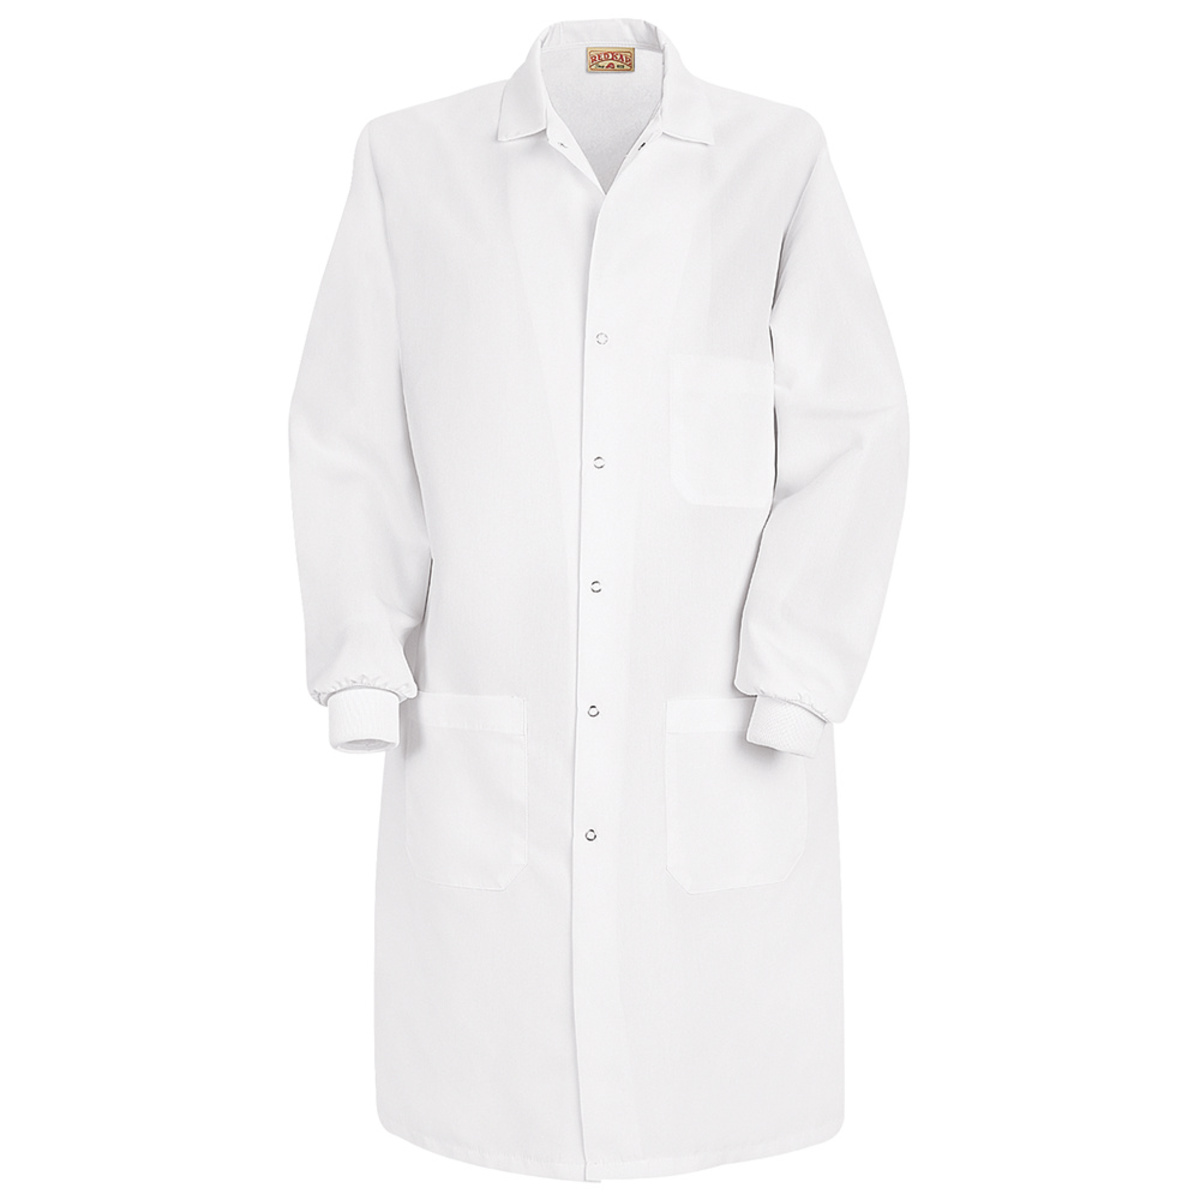 Red Kap® Small/Regular White Lab Coat With Gripper Closure